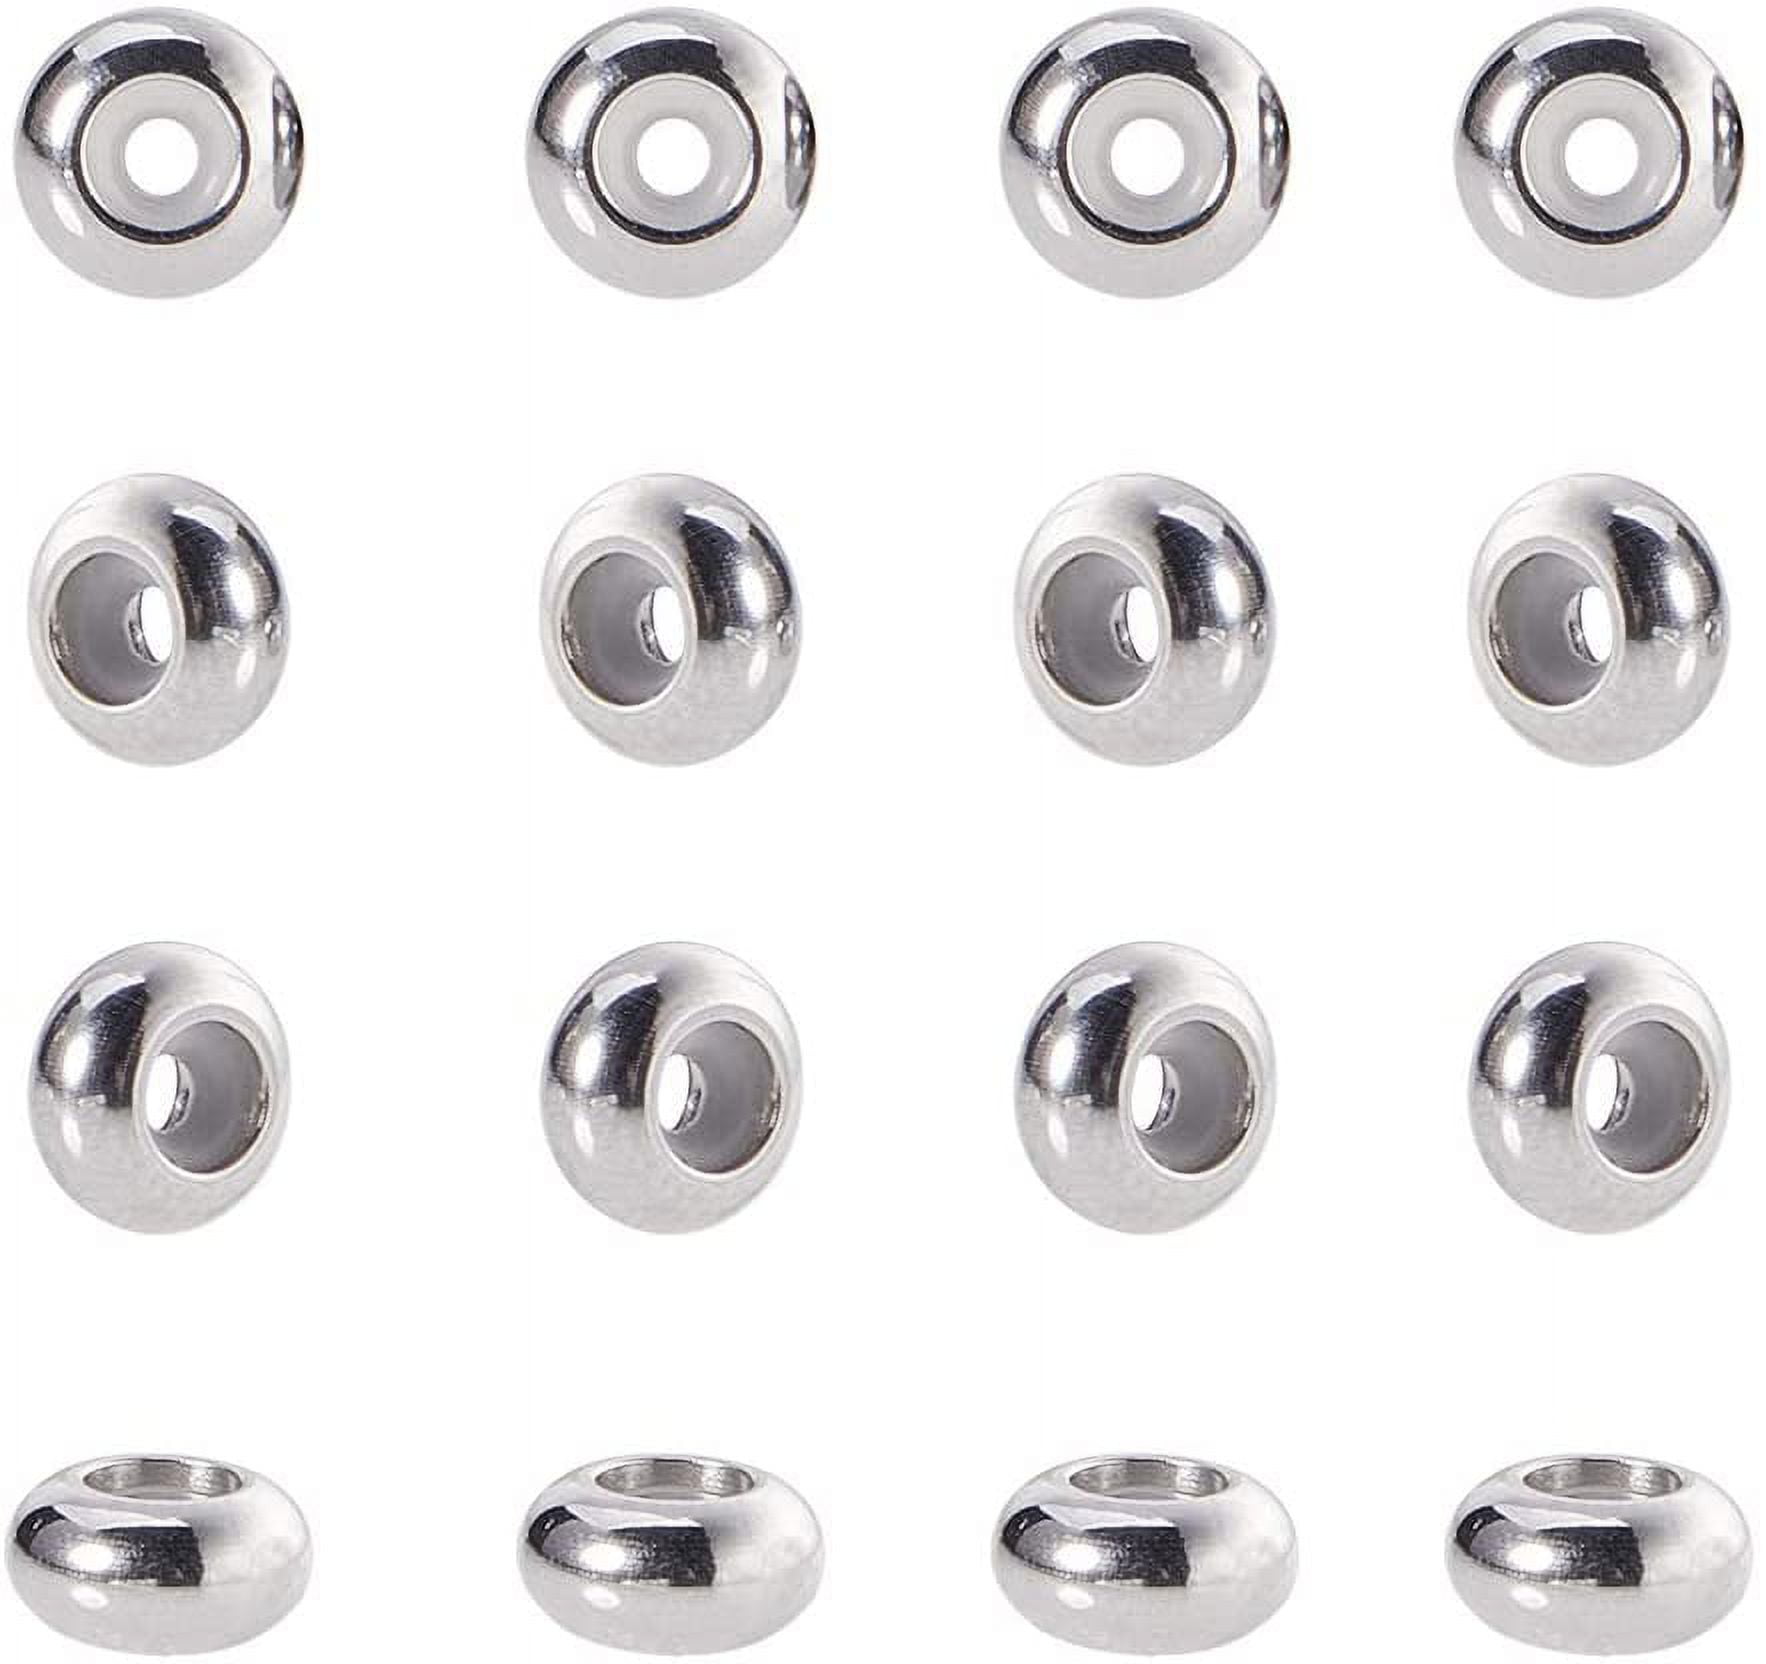  925 Sterling Silver Beads for Jewelry Making,Smooth Round Ball  Beads Spacer Beads for Ring Necklace Earring Bracelets Making (Made in  Italy 5mm)